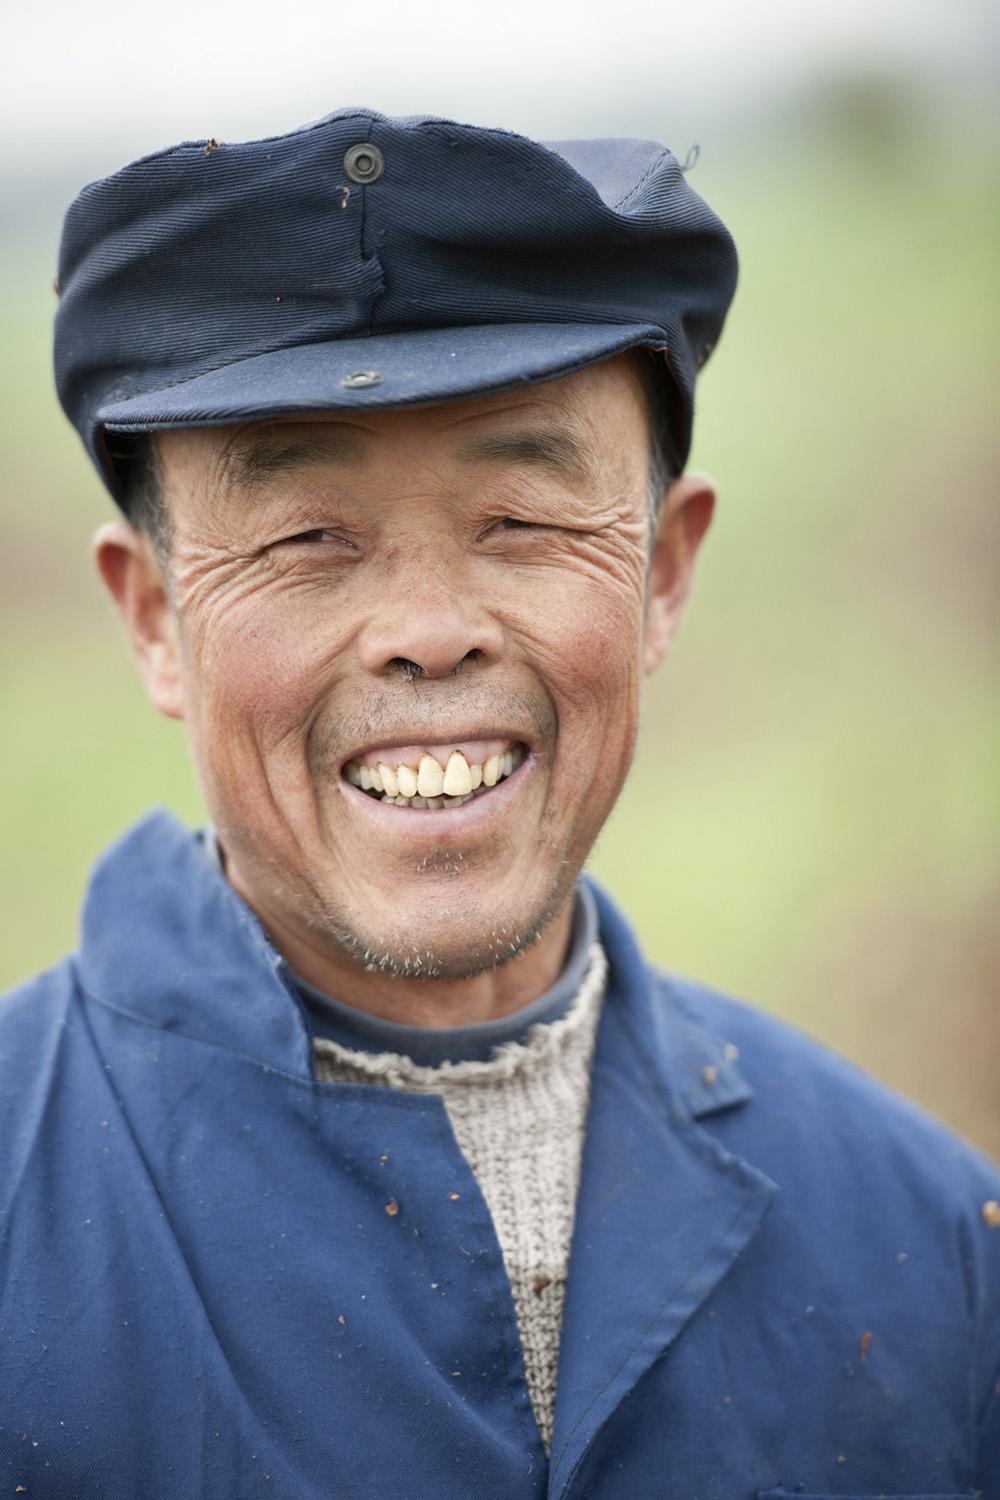 image of AARONTAIT COPYRIGHTED 2014 302 TRAVEL PHOTOGRAPHER ASIA REPORTAGE EDITORIAL STORY HUMANS LIFE EARTH TRAVELER EXPLORE CULTURE PEOPLE COUNTRY NATIONALITY DOCUMENTARY CHINA WORKER CHINESE RURAL SMILE